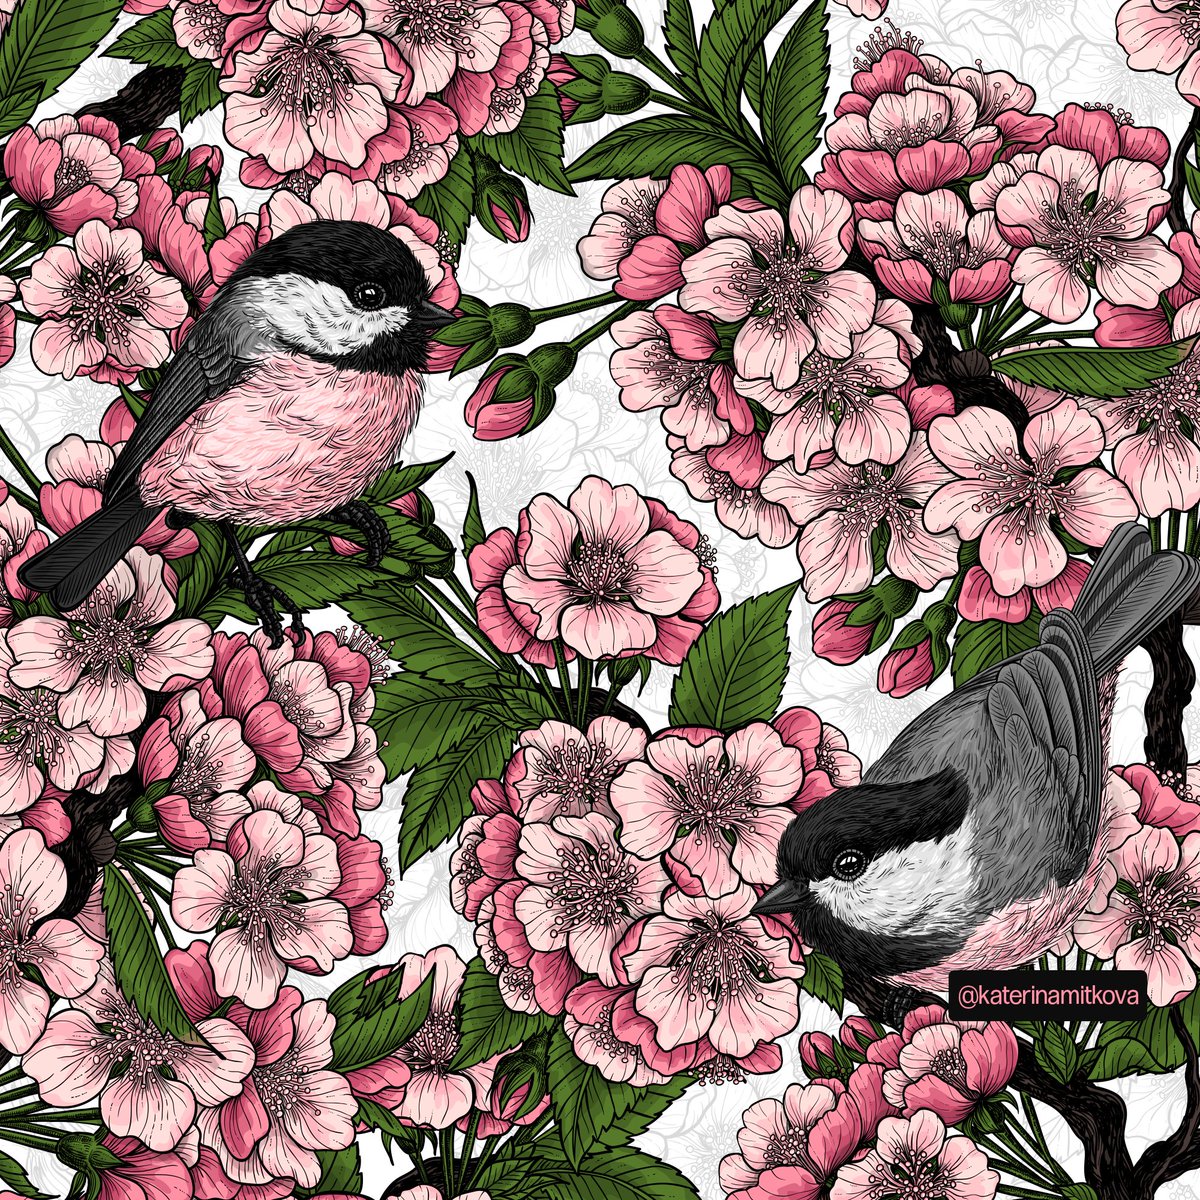 4 new colorways of my pattern Cherry blossoms and chickadees. Any favorites?
#spoonflower #fabric #fabricdesign #textiledesign #pattern #patternlove #birdart #chicadee #floraldesign #print #floralprint #springpattern #katerinakart #zazzle #sociey6 #redbubble #patternlicensing